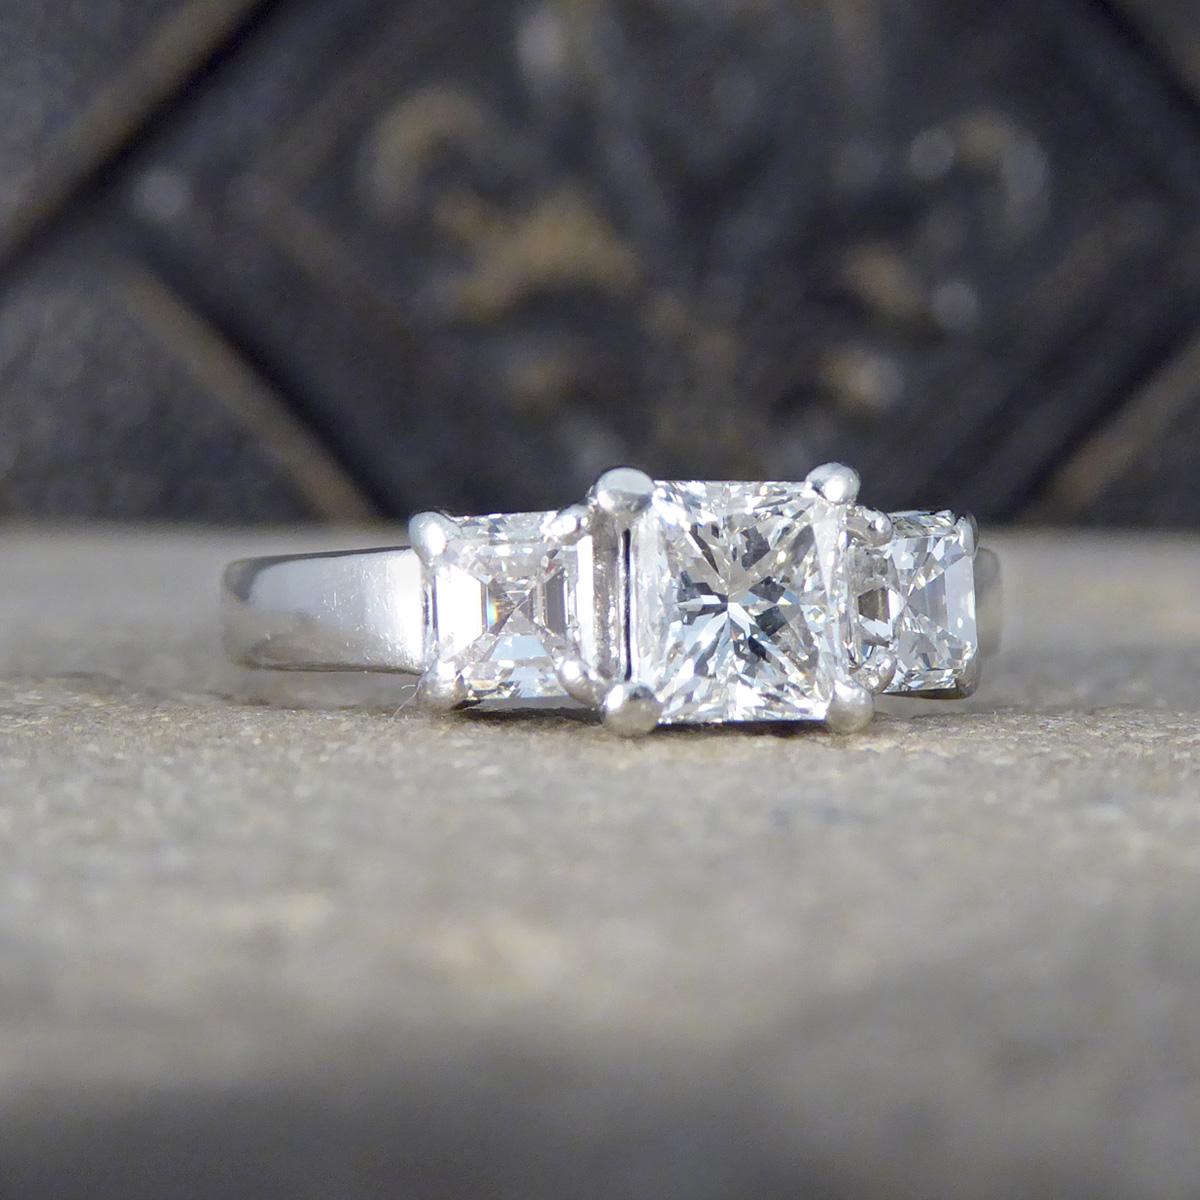 Introducing our captivating Princess Cut and Asscher Cut Diamond Three Stone Ring in Platinum, a masterpiece of elegance and sophistication. This stunning ring features a brilliant 0.77ct Princess Cut diamond, expertly set as the centerpiece,